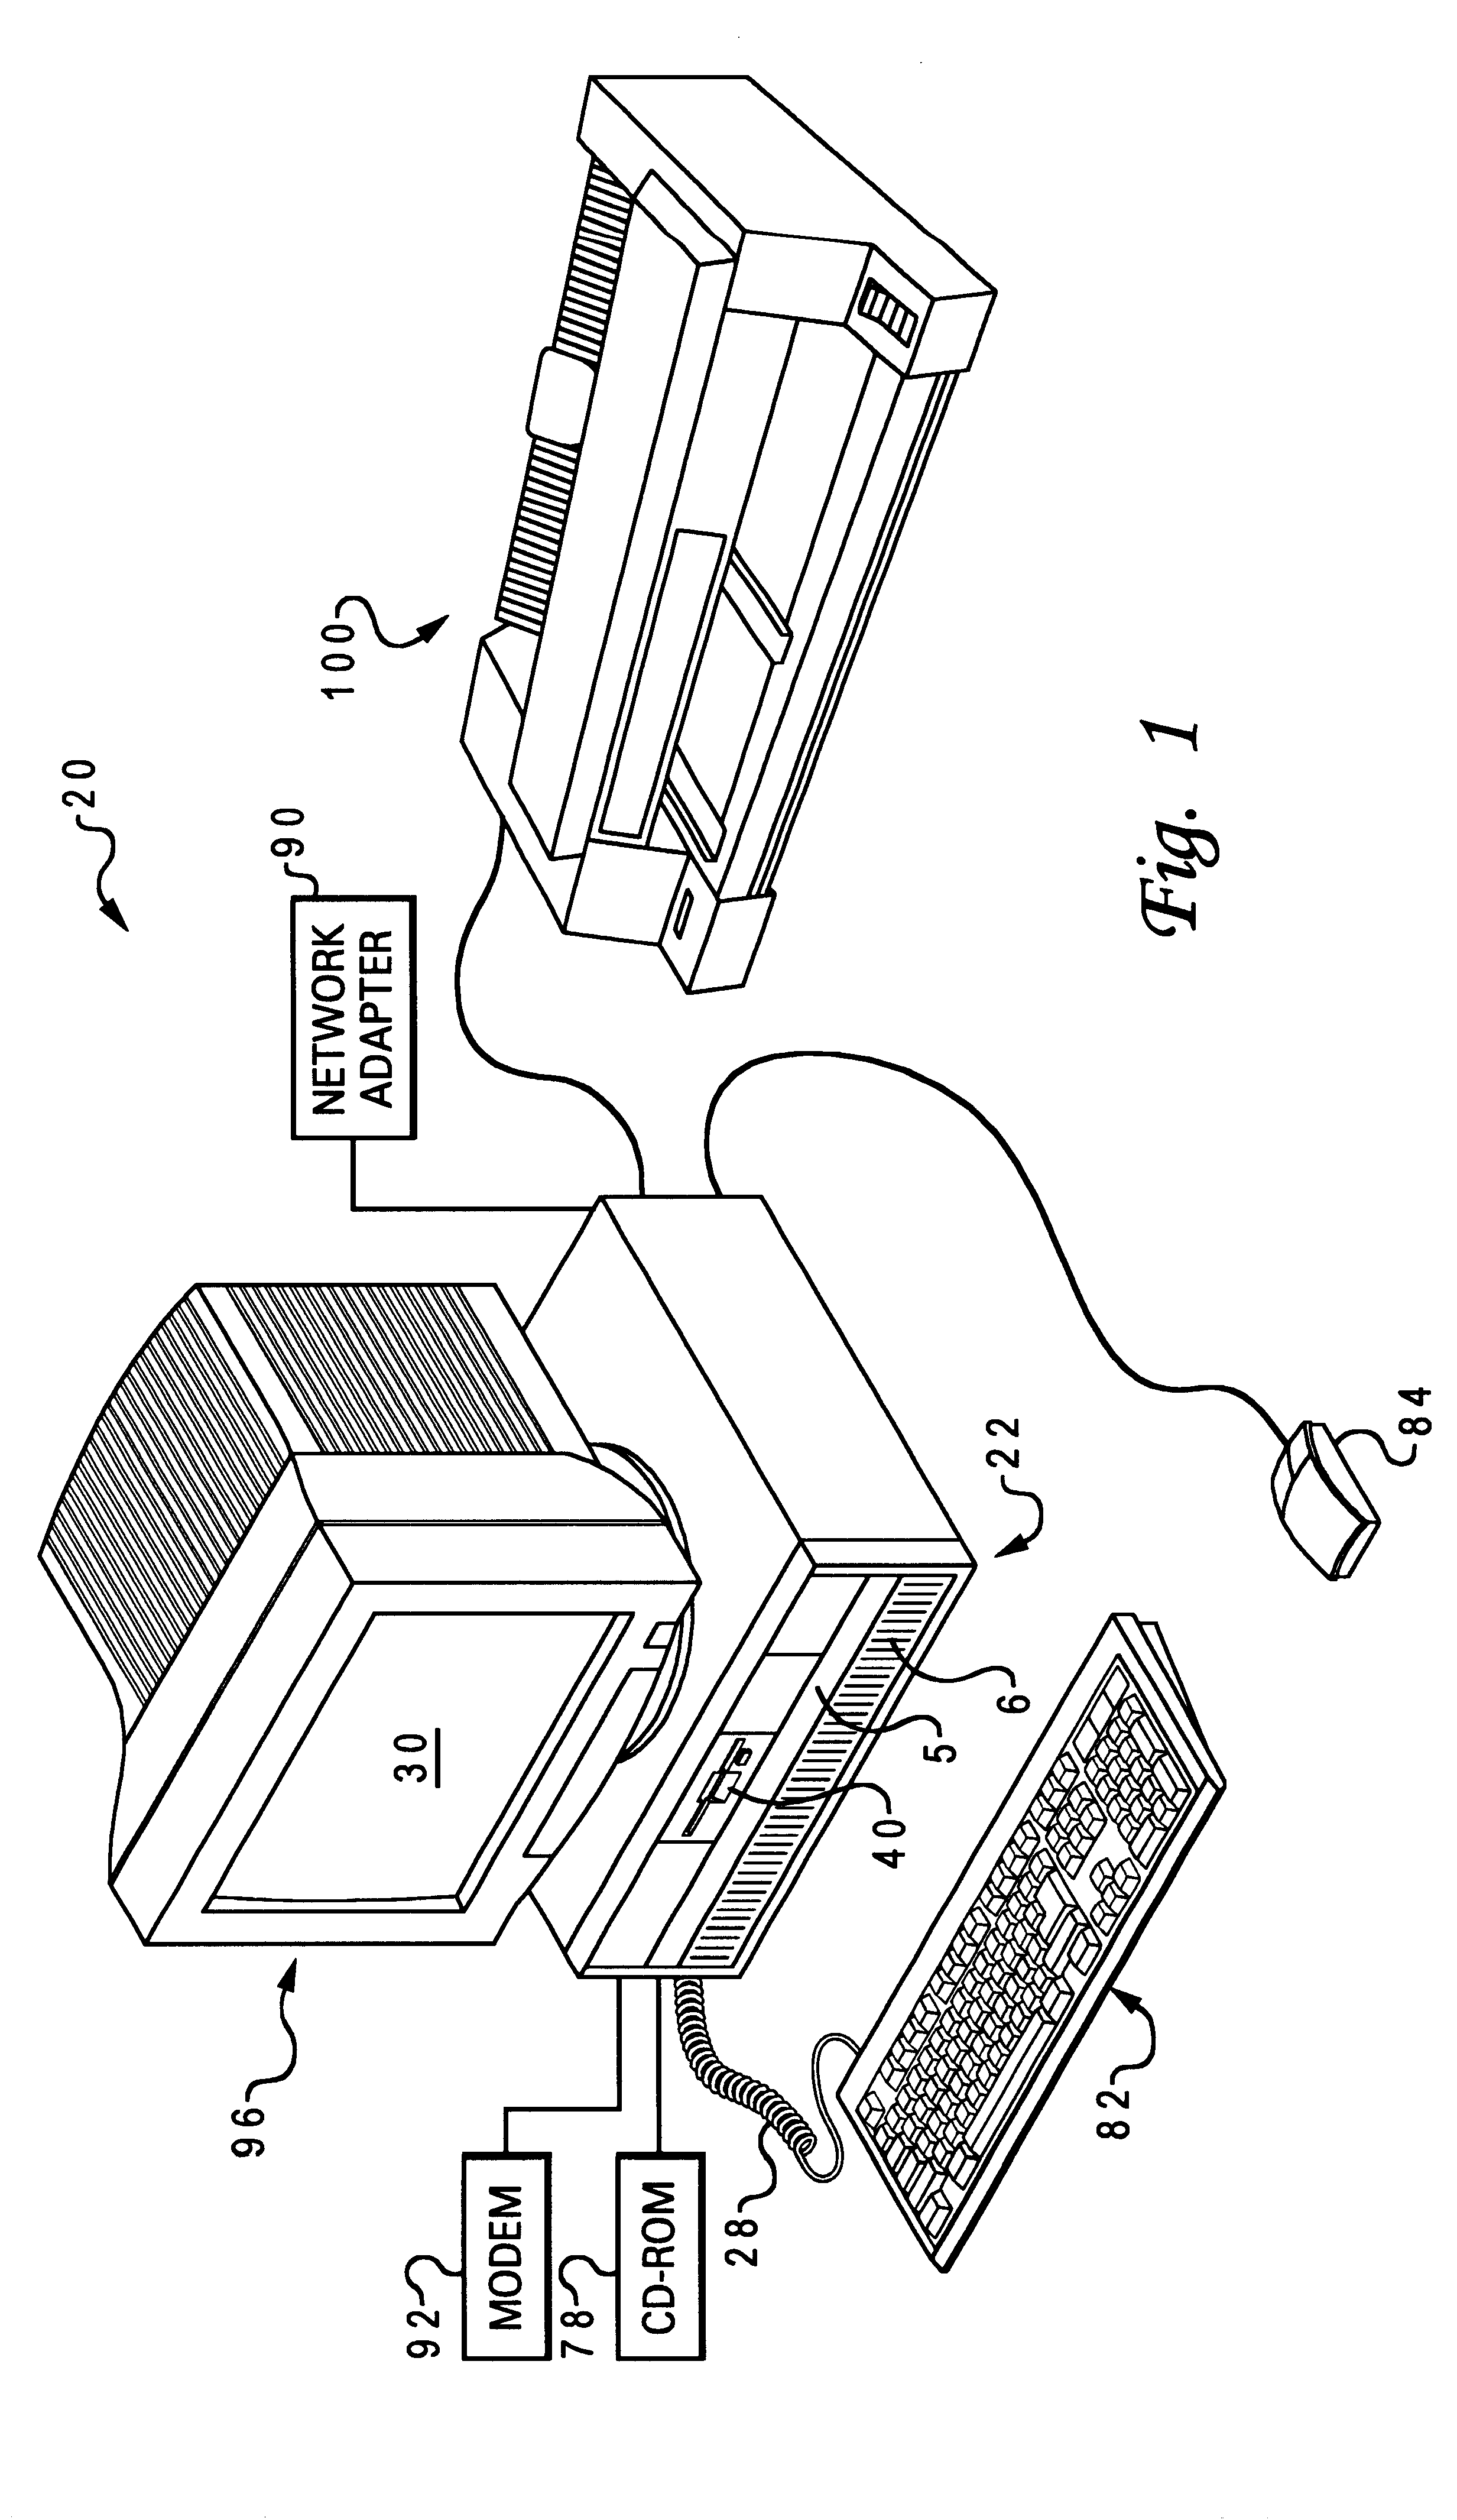 Method and system for providing hot plug of adapter cards in an expanded slot environment